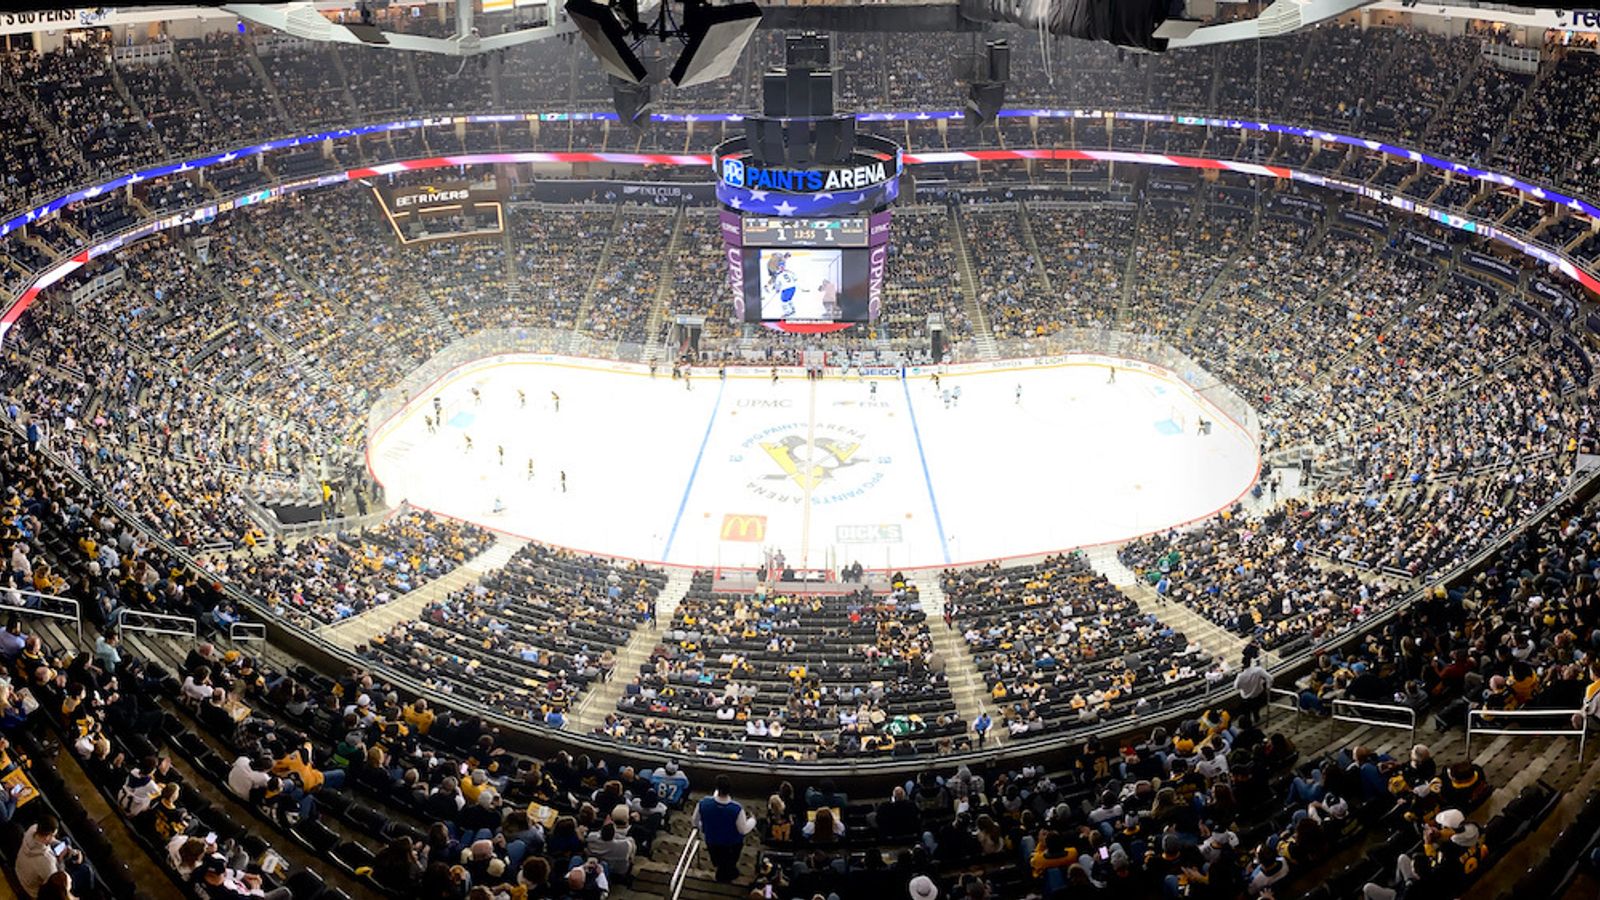 Penguins announce sellout with 15 percent of arena being full